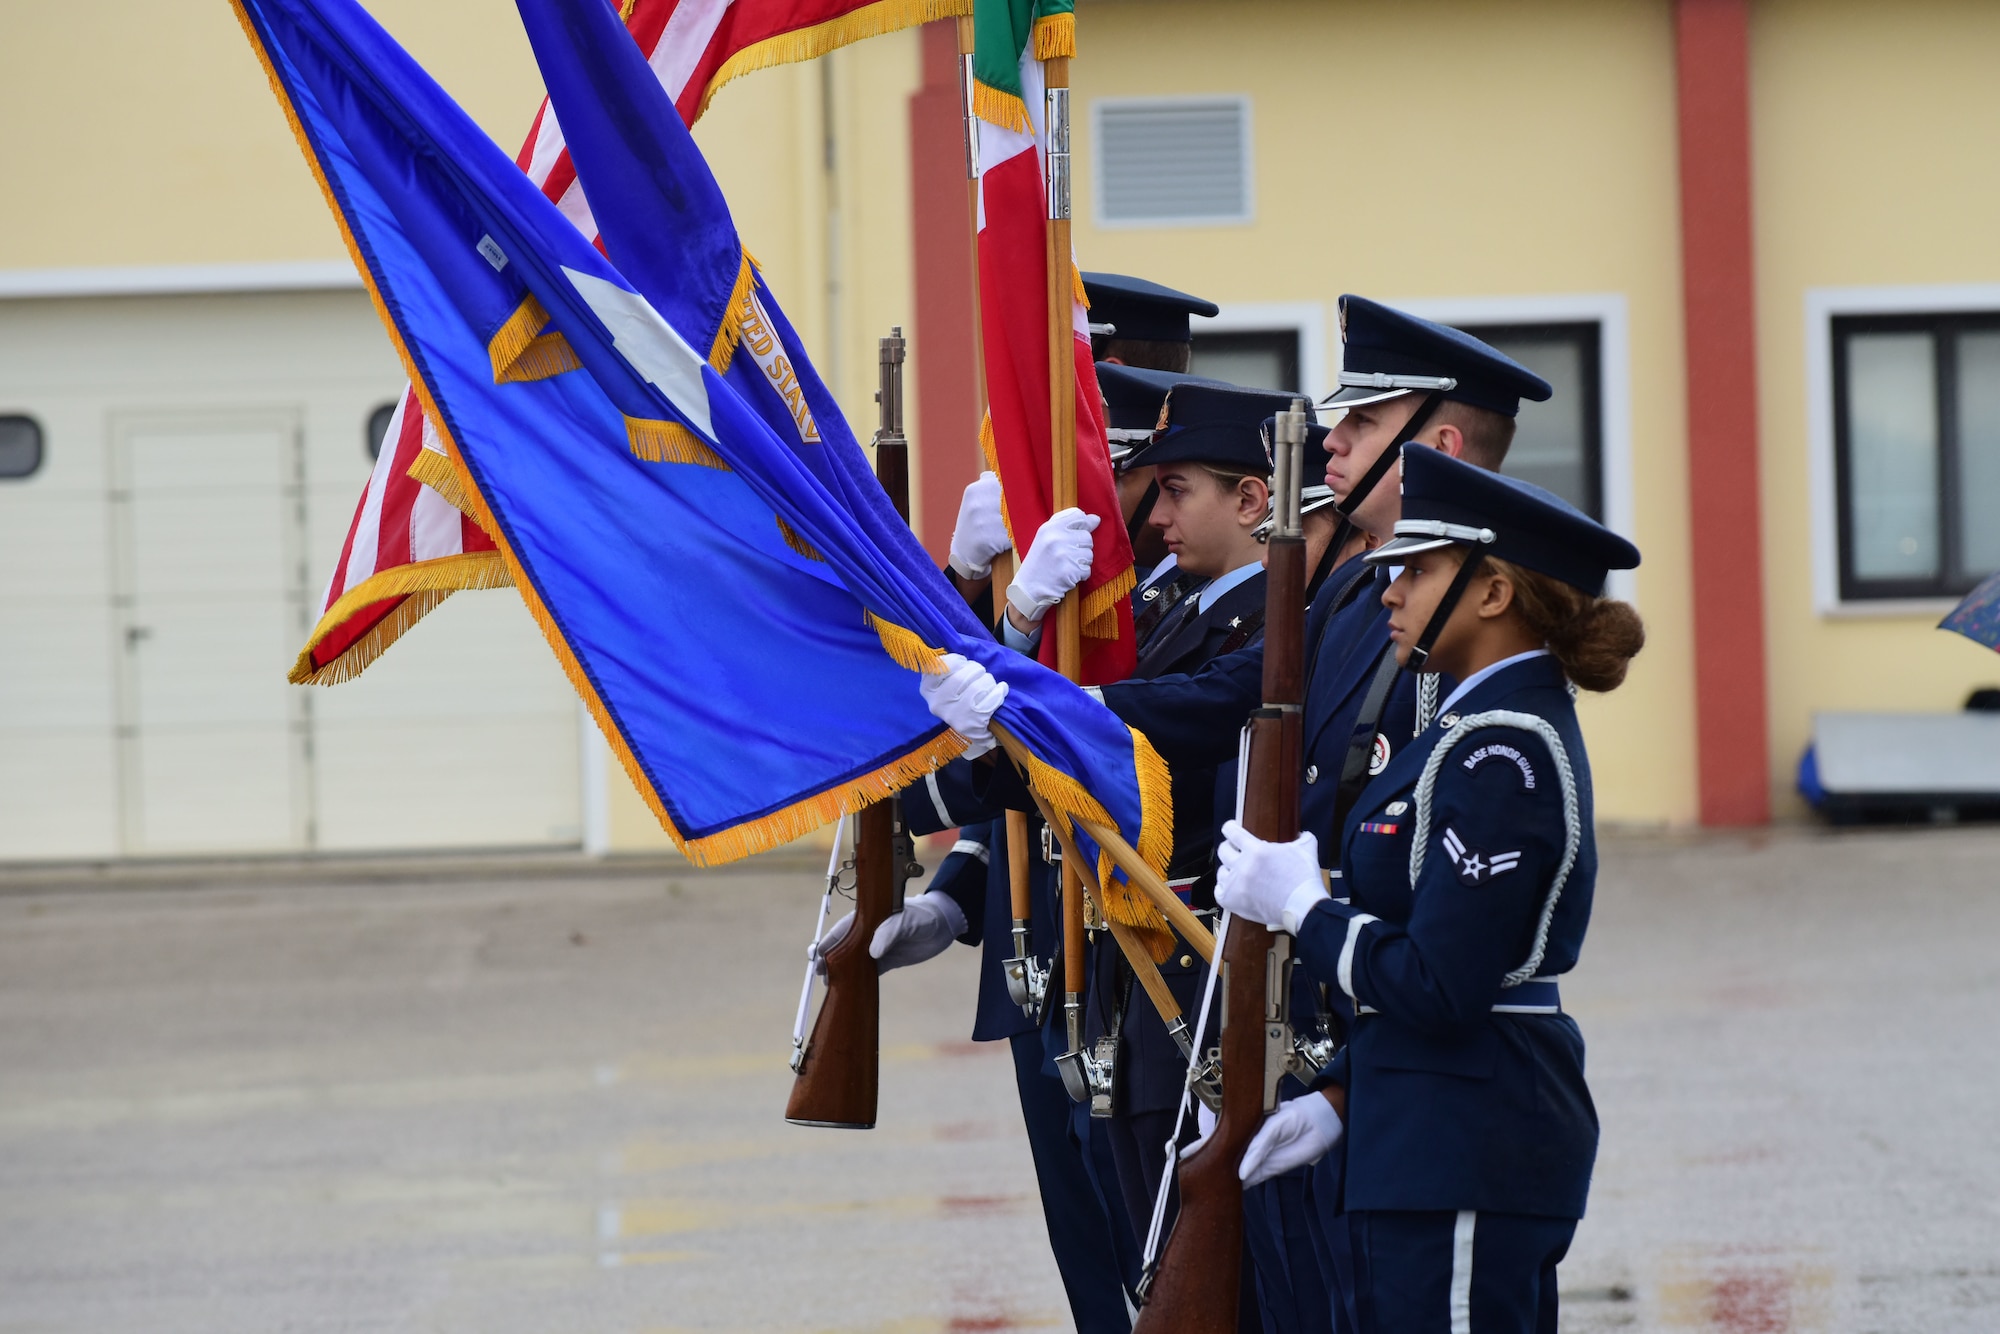 Aviano Air Base’s Honor Guard presents the colors during an open house at Aviano AB, Italy, April 1, 2022. The U.S. Air Force and Italian air force organized the demonstration for military children as well as local community school children in honor of the Month of the Military Child. Students viewed a variety of static displays and the Frecce Tricolori Italian air force aerobatics team performed aerial maneuvers. (U.S. Air Force photo by Senior Airman Jessica Blair)